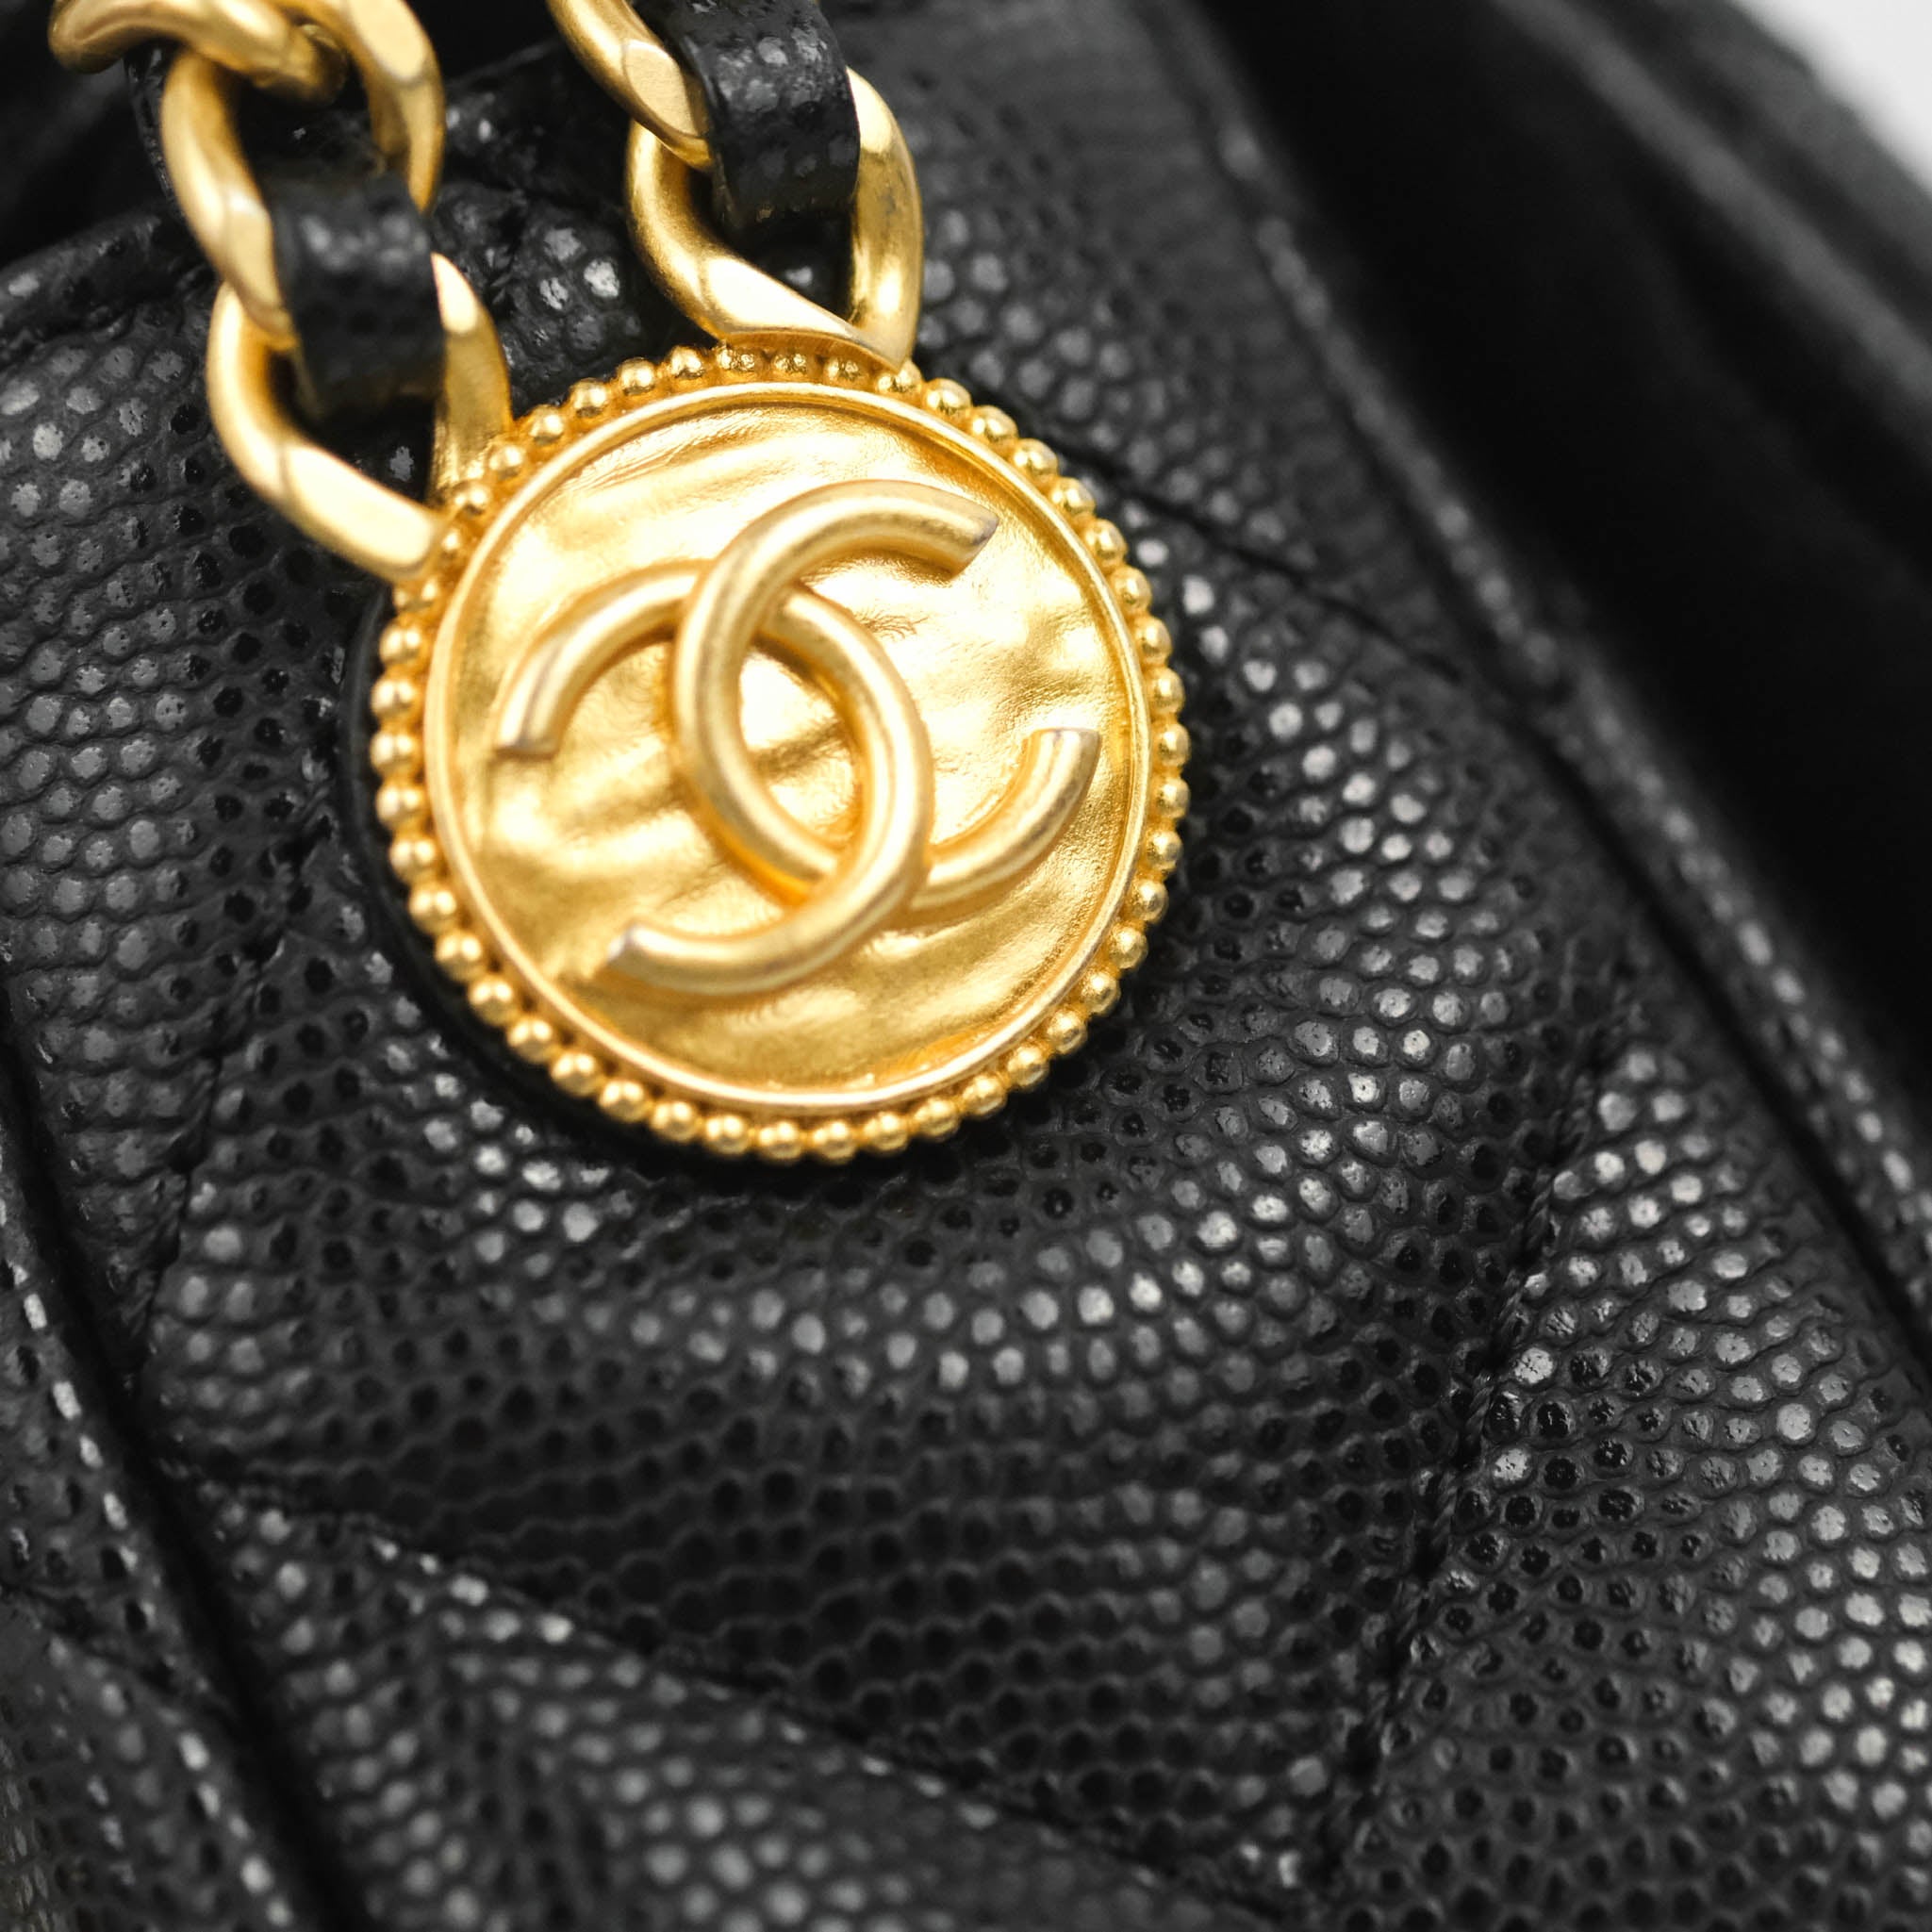 Chanel Mini Flap Bag With Heart CC Charm Black Lambskin Aged Gold Hard –  Coco Approved Studio